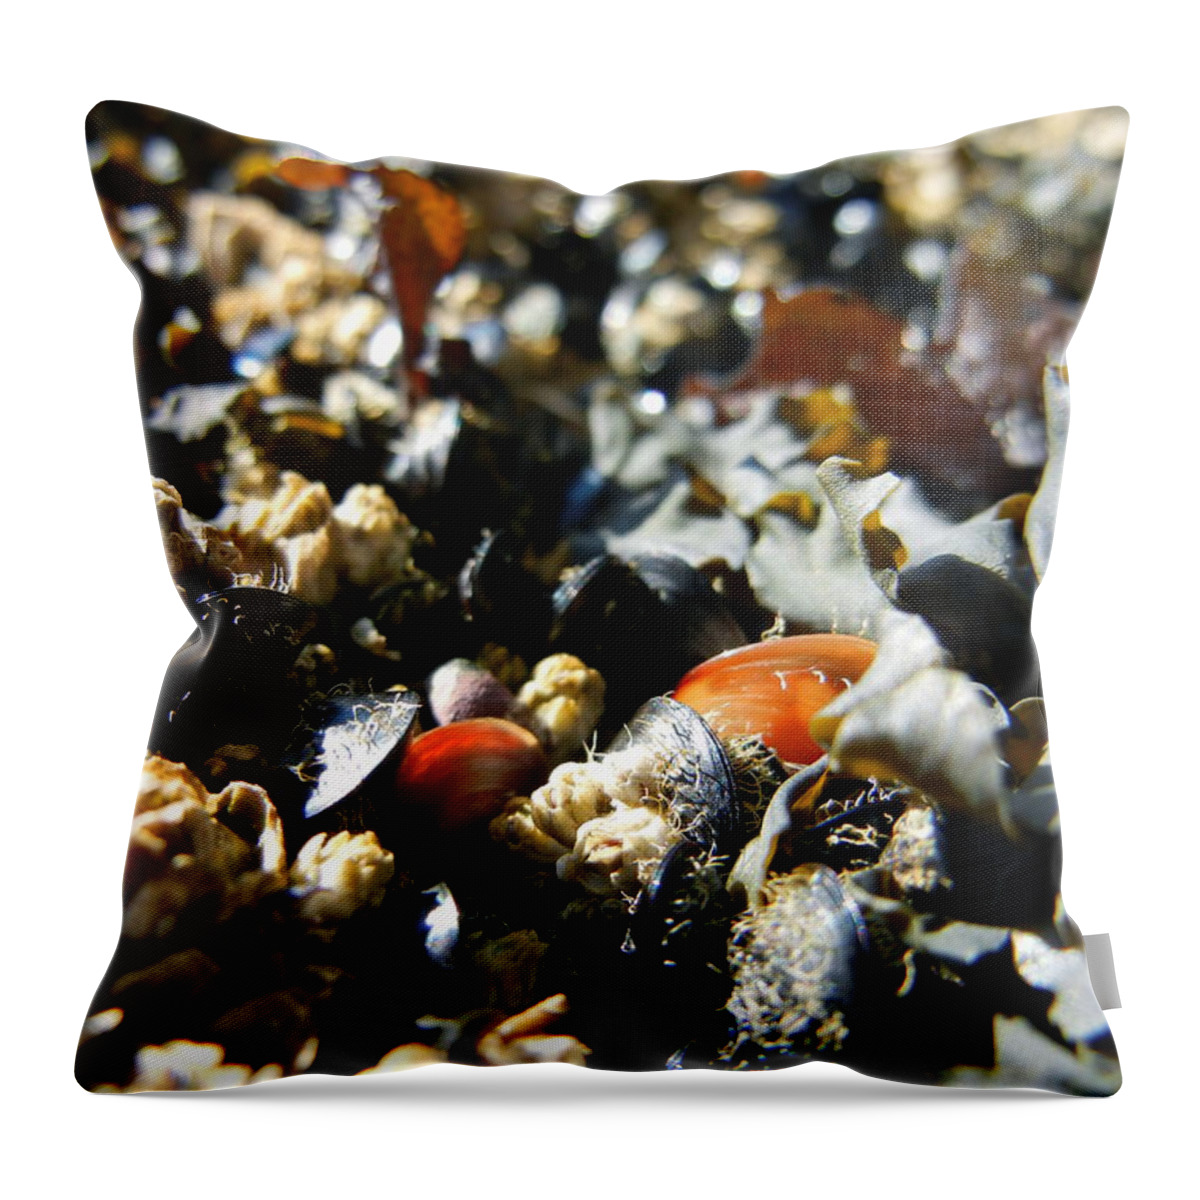 Ocean Throw Pillow featuring the photograph And Cockle Shells by KD Johnson